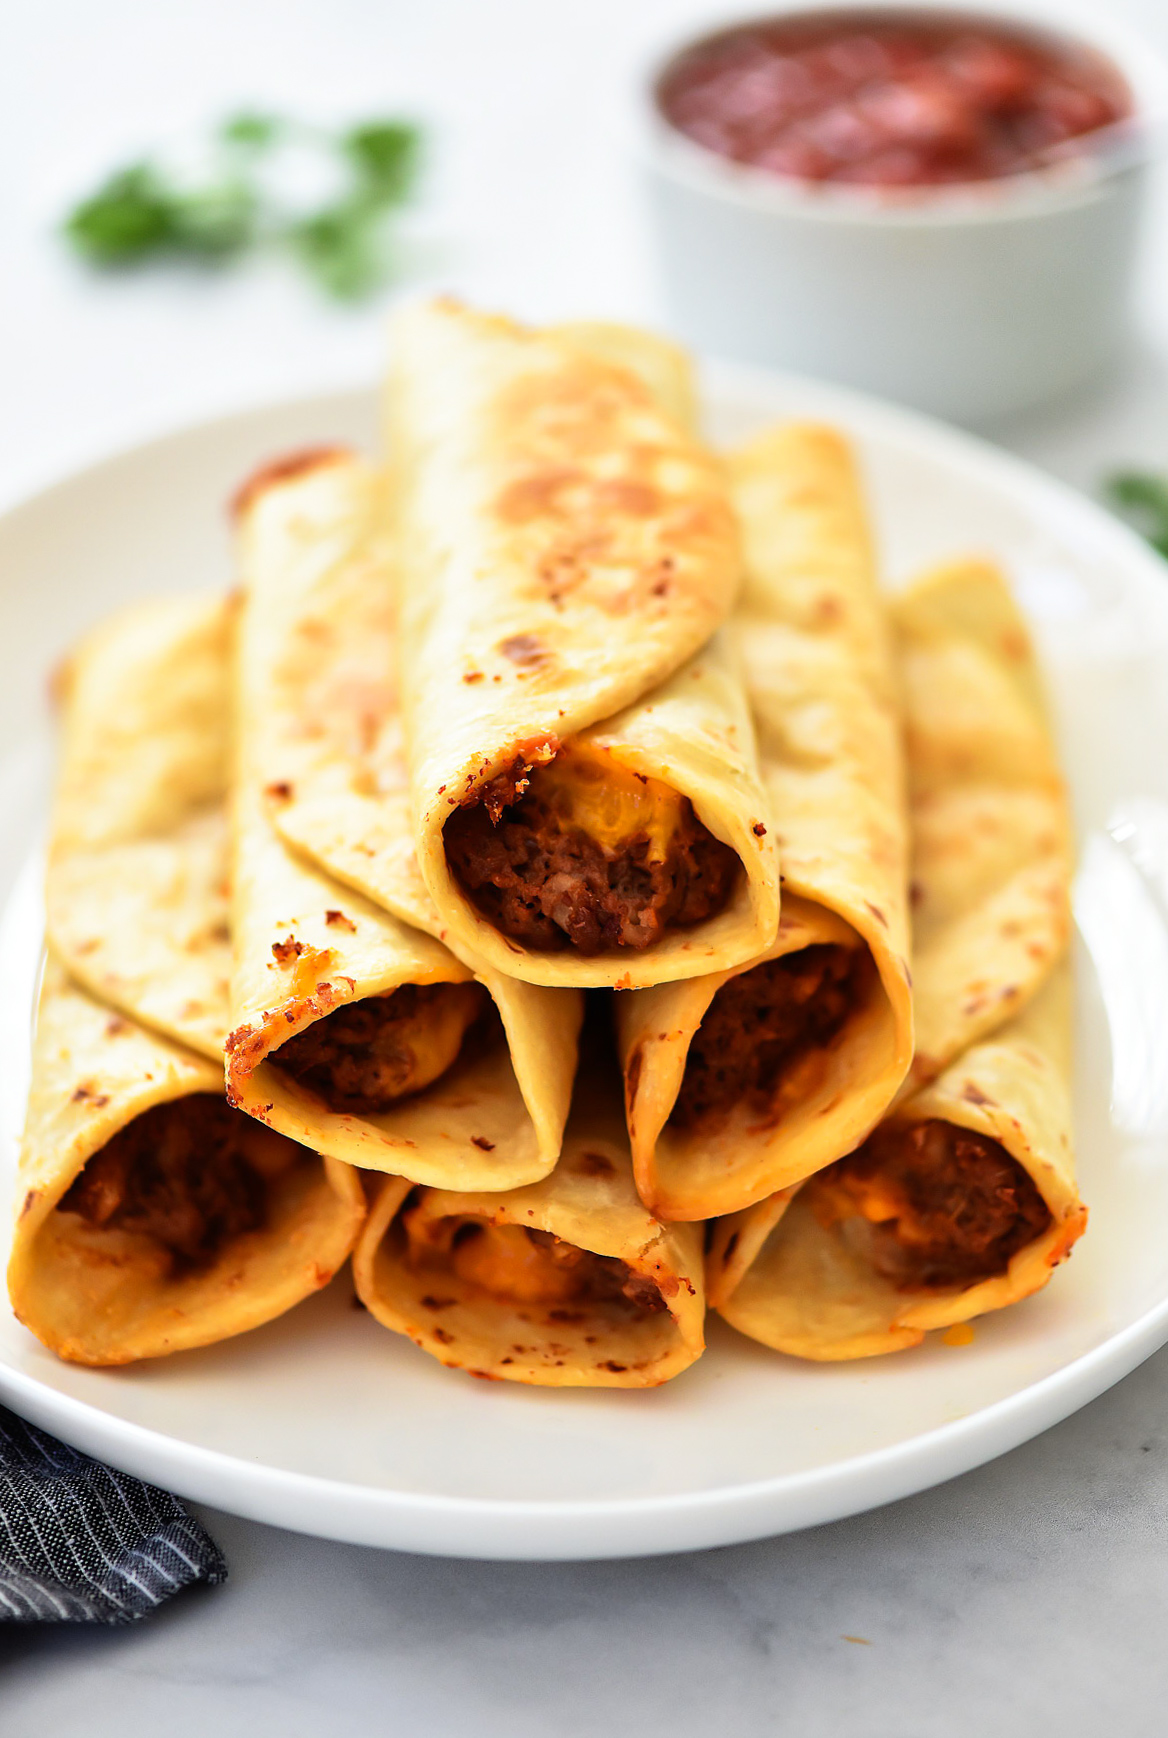 Crisp Bean Burritos are filled with cheesy refried beans all wrapped inside a flour tortilla then deep-fried. Life-in-the-Lofthouse.com